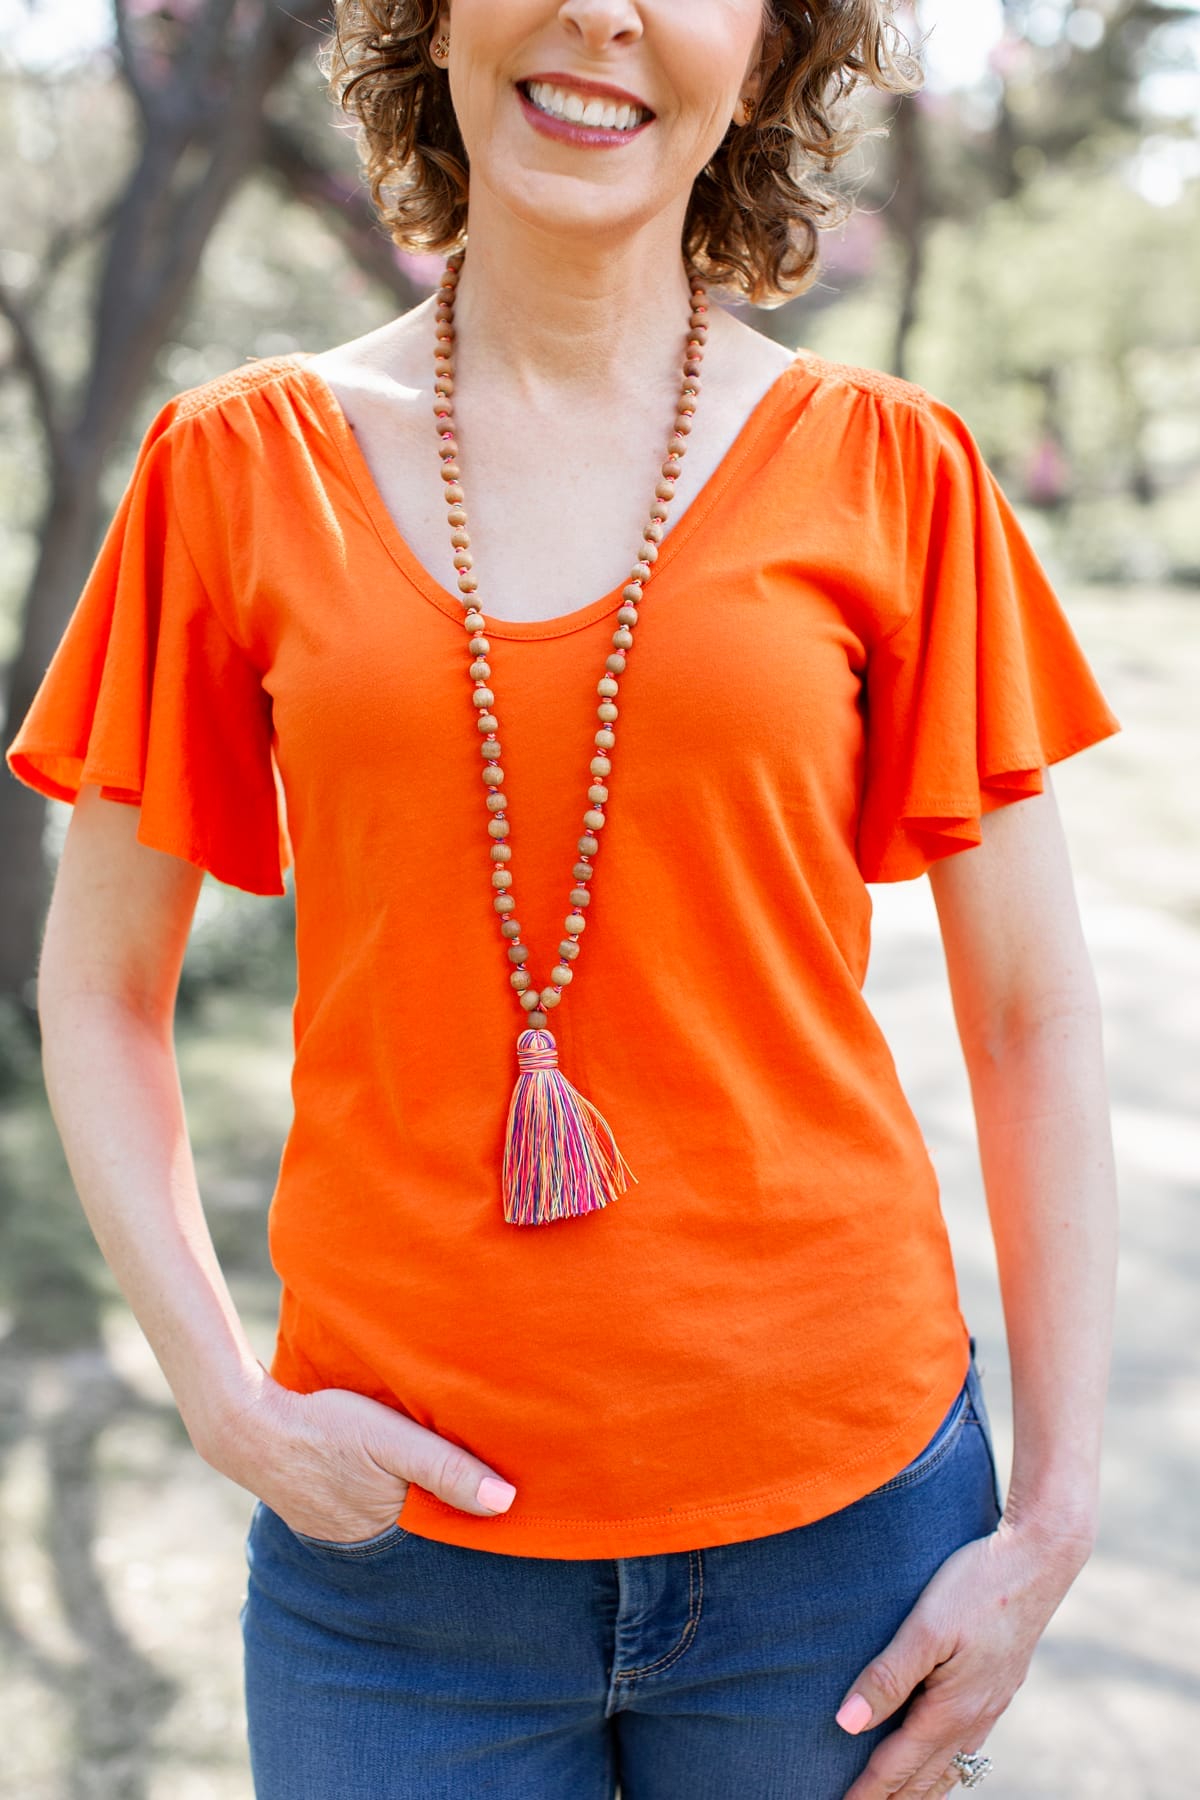 woman in orange shirt and tassel necklace in park